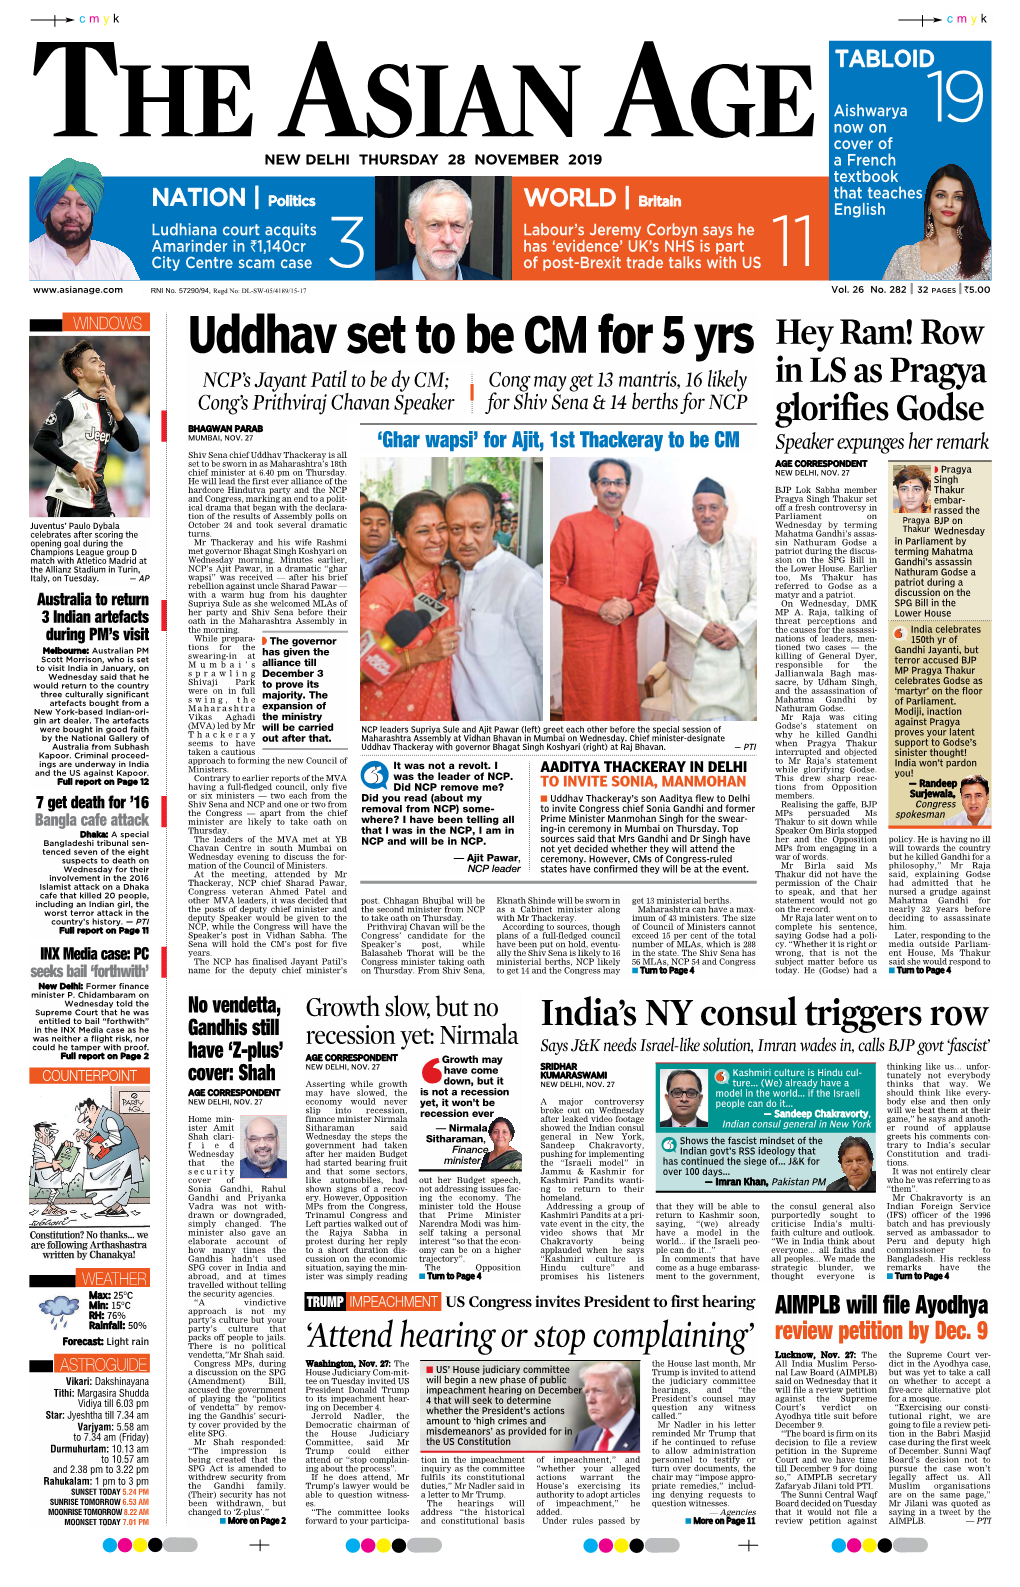 Uddhav Set to Be CM for 5